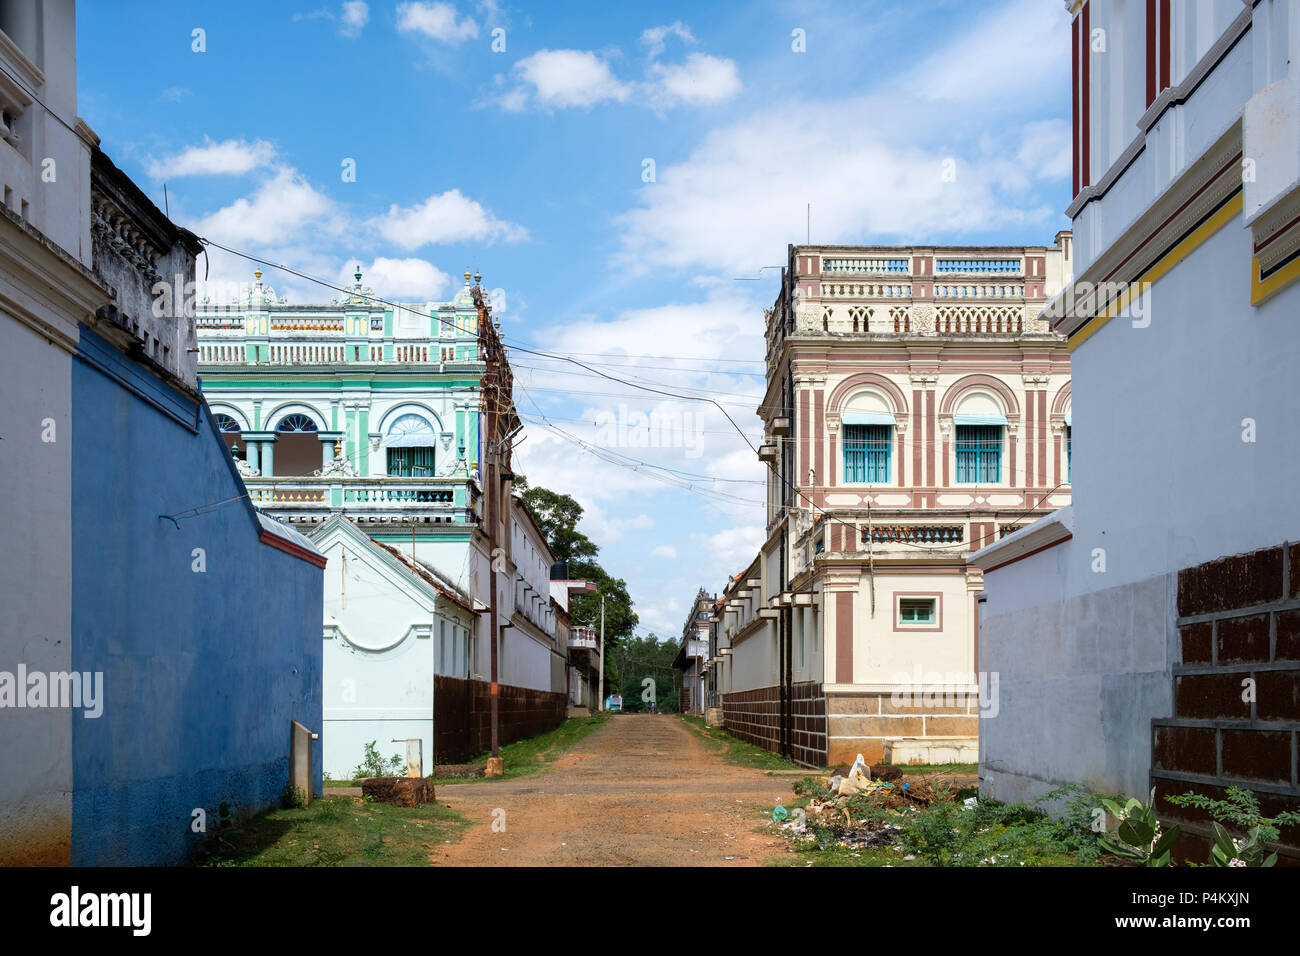 Chettinad mansion in Kanadukathan. Chettiars were rich, 19th-century merchants and bankers from the Chettinad region, Tamil Nadu, India. Stock Photo